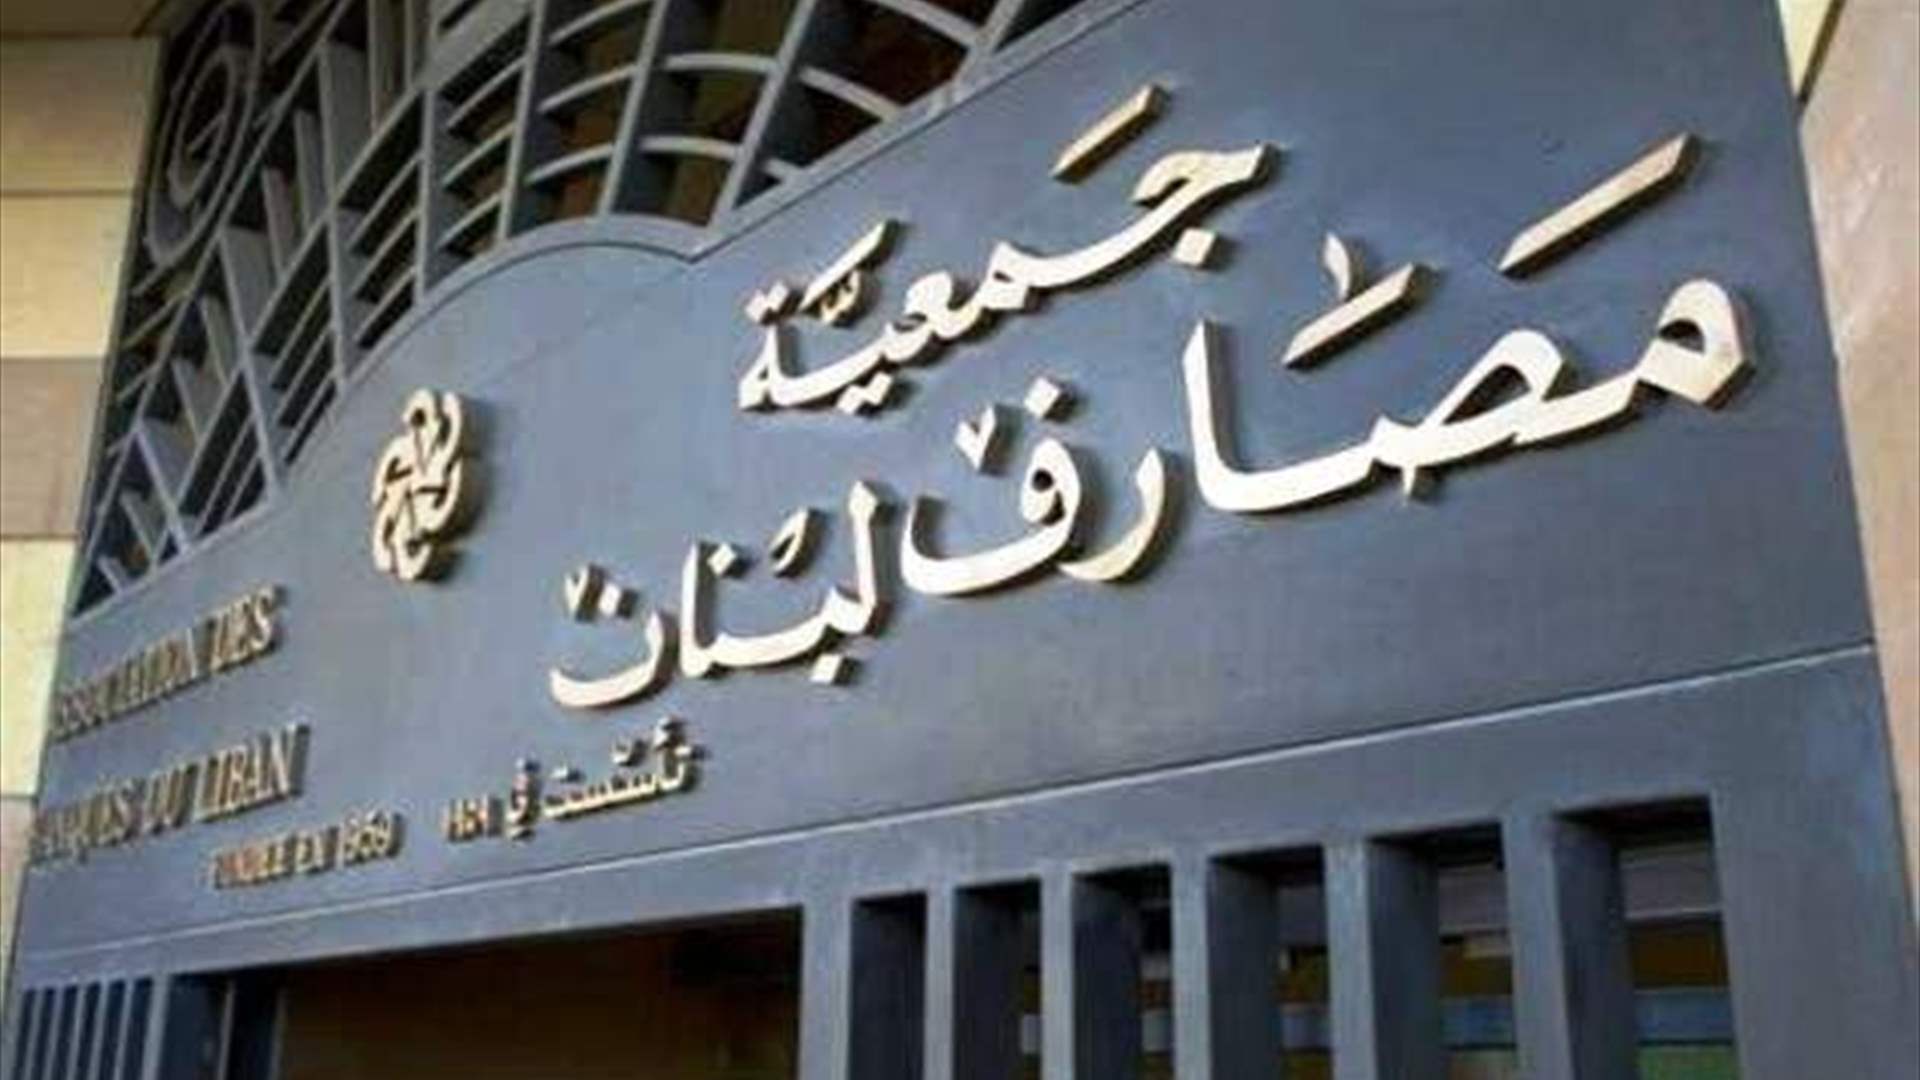 Association of Banks: Bank transfers abroad were submitted to the official judicial bodies who have the final say